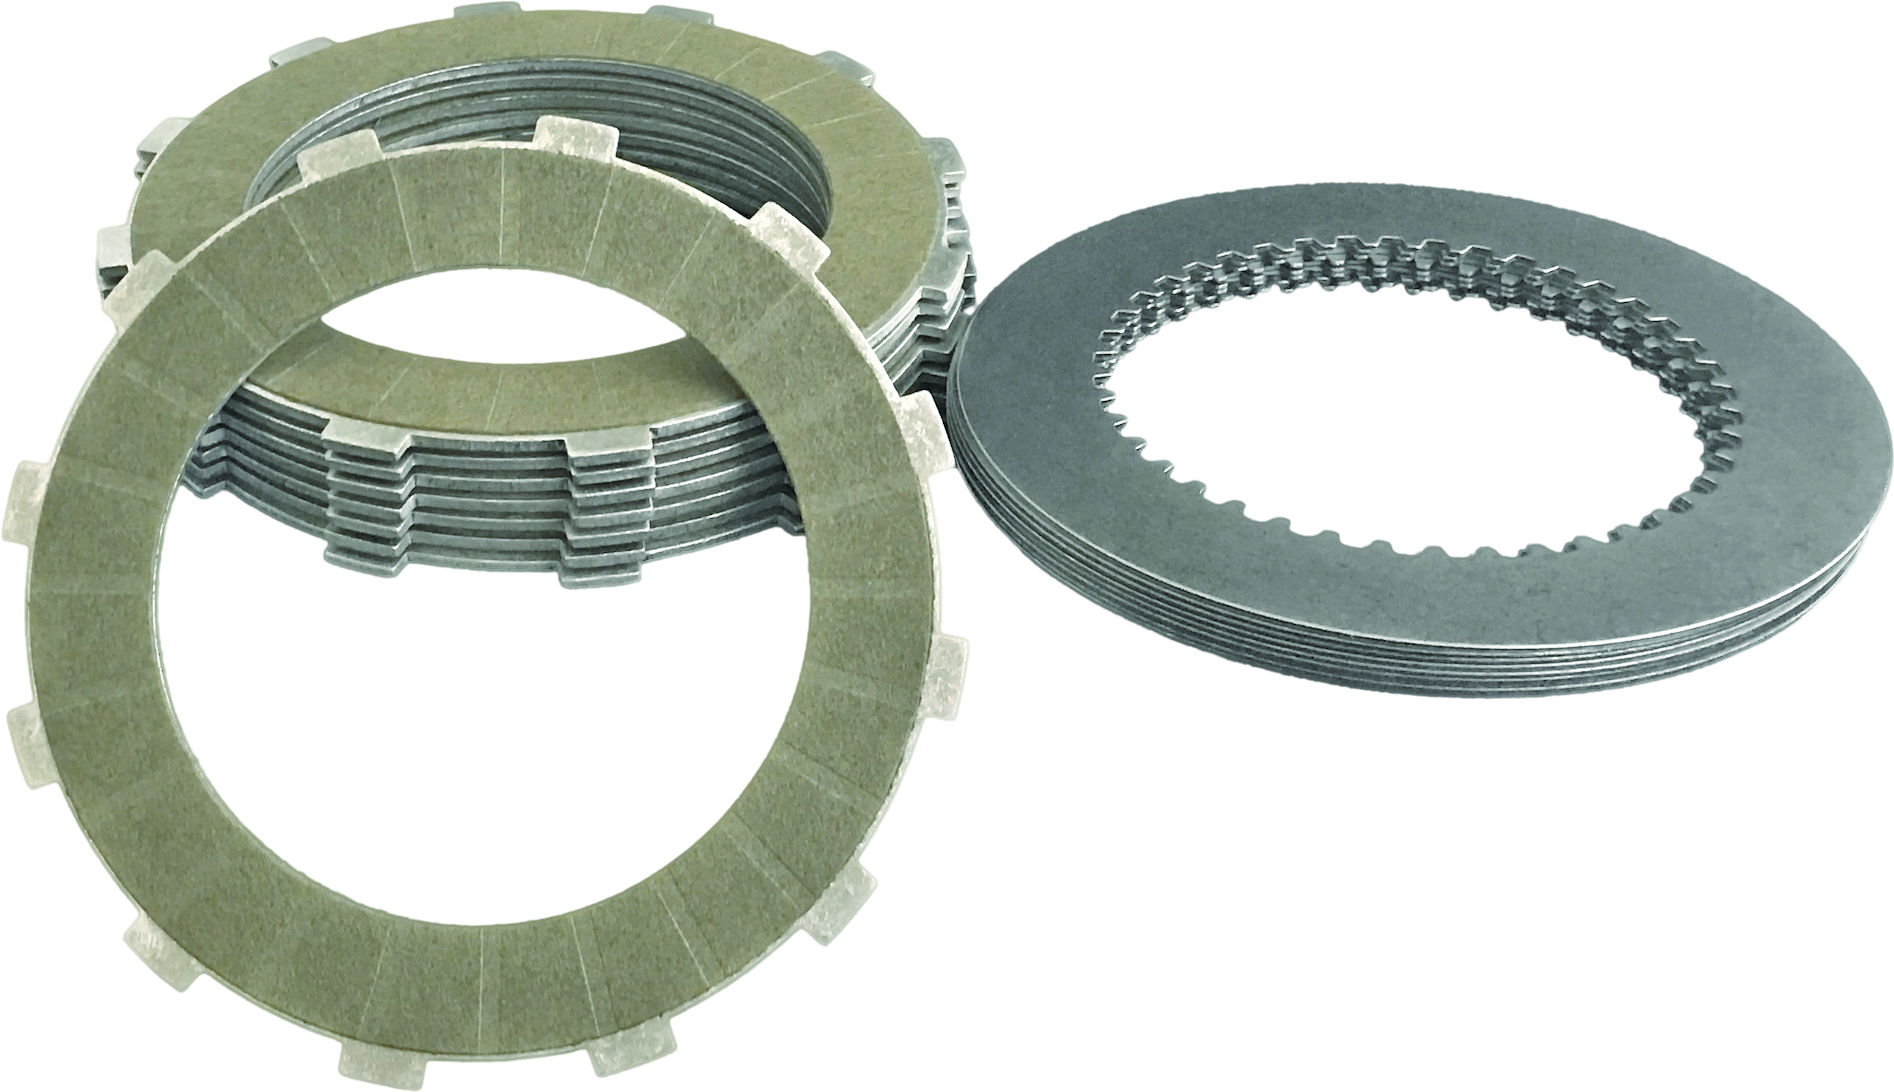 Replacement Clutch Plate Kit For Rivera Primo / Pro Clutch #1043-0013 - Click Image to Close